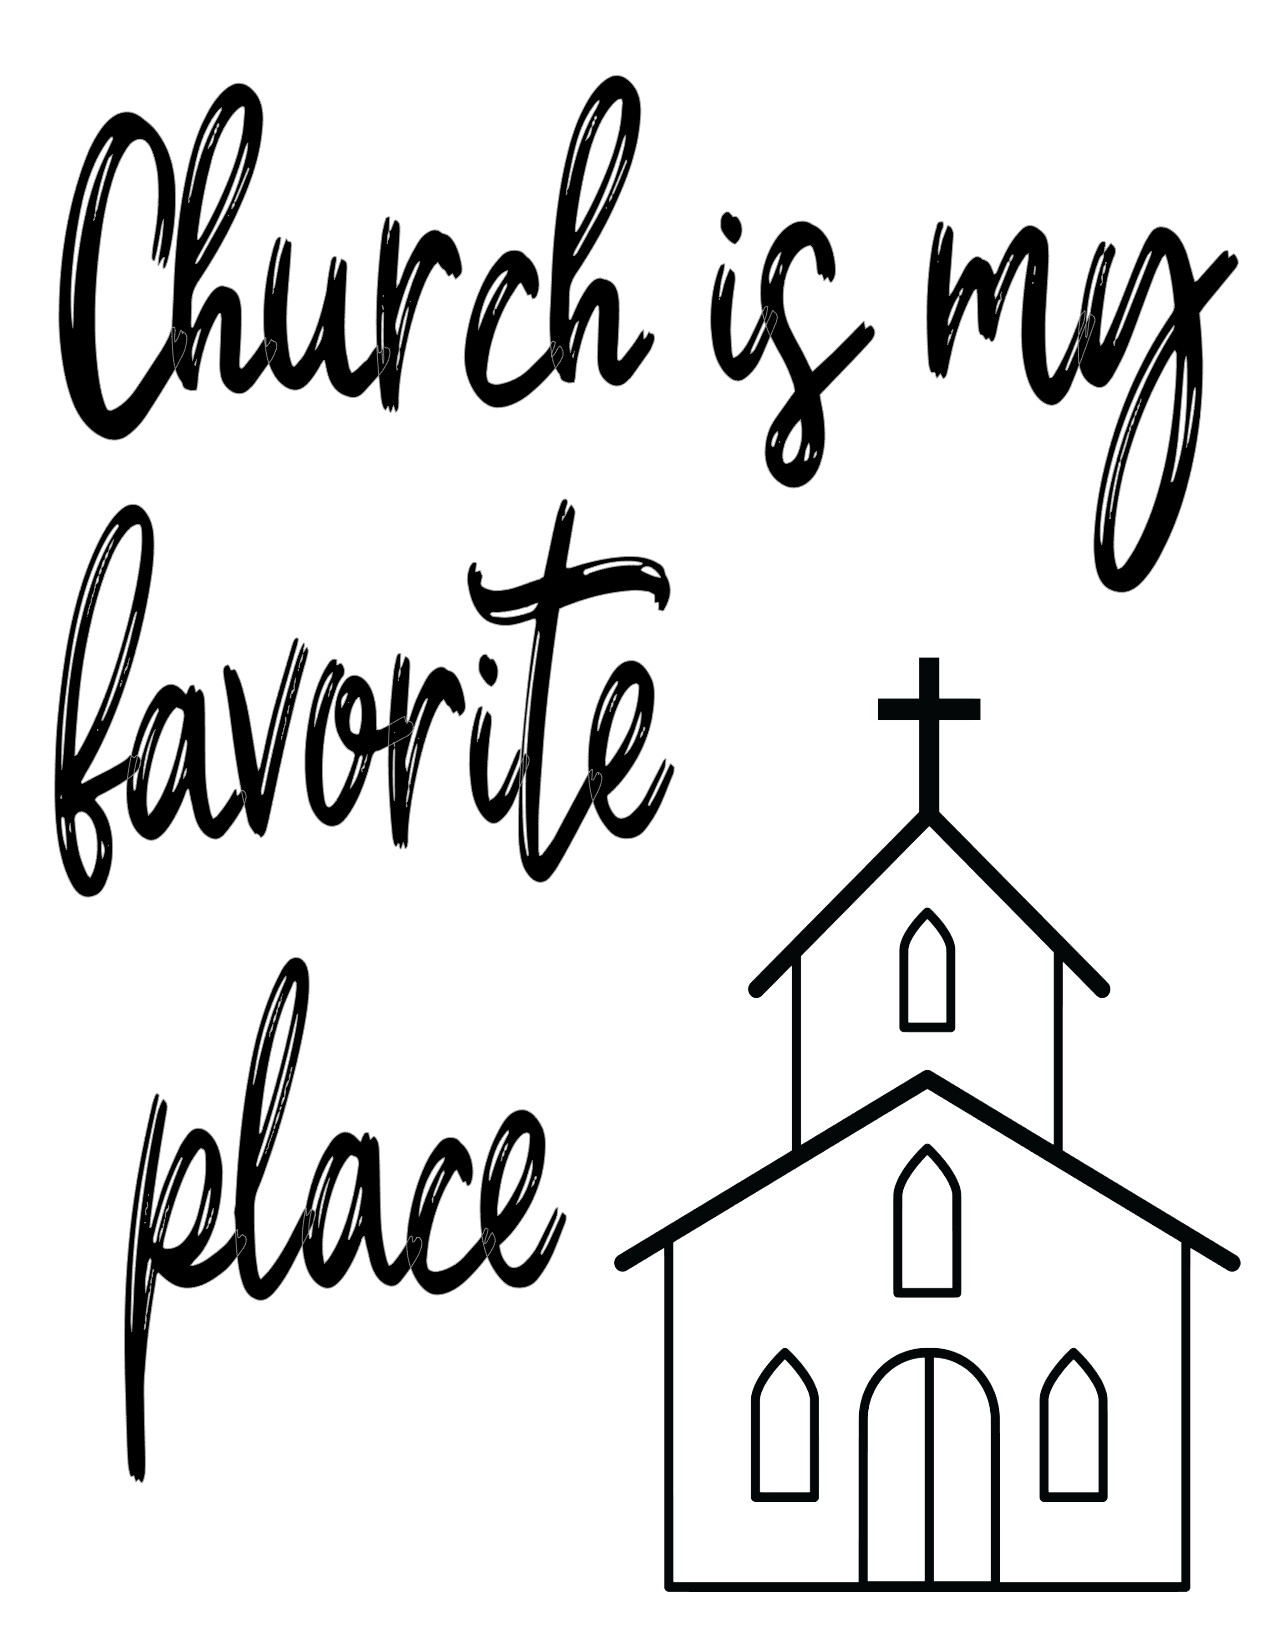 #227 Church is favorite place